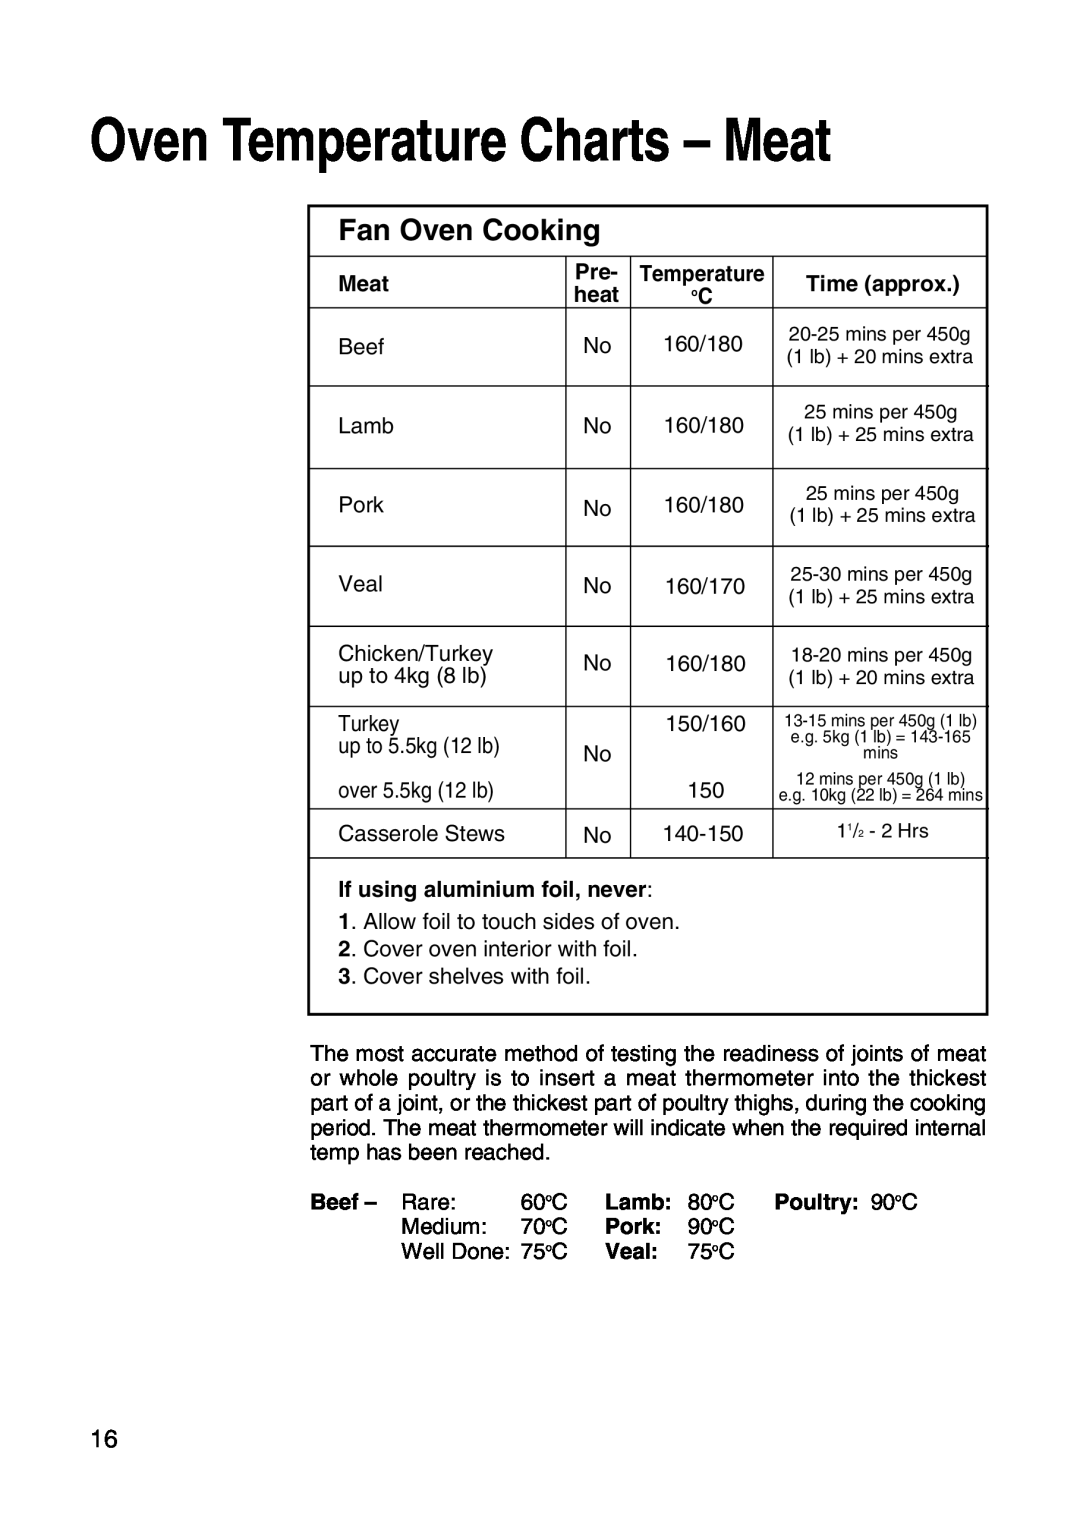 Hotpoint EW31 Oven Temperature Charts - Meat, Fan Oven Cooking, Time approx, If using aluminium foil, never, Beef - Rare 